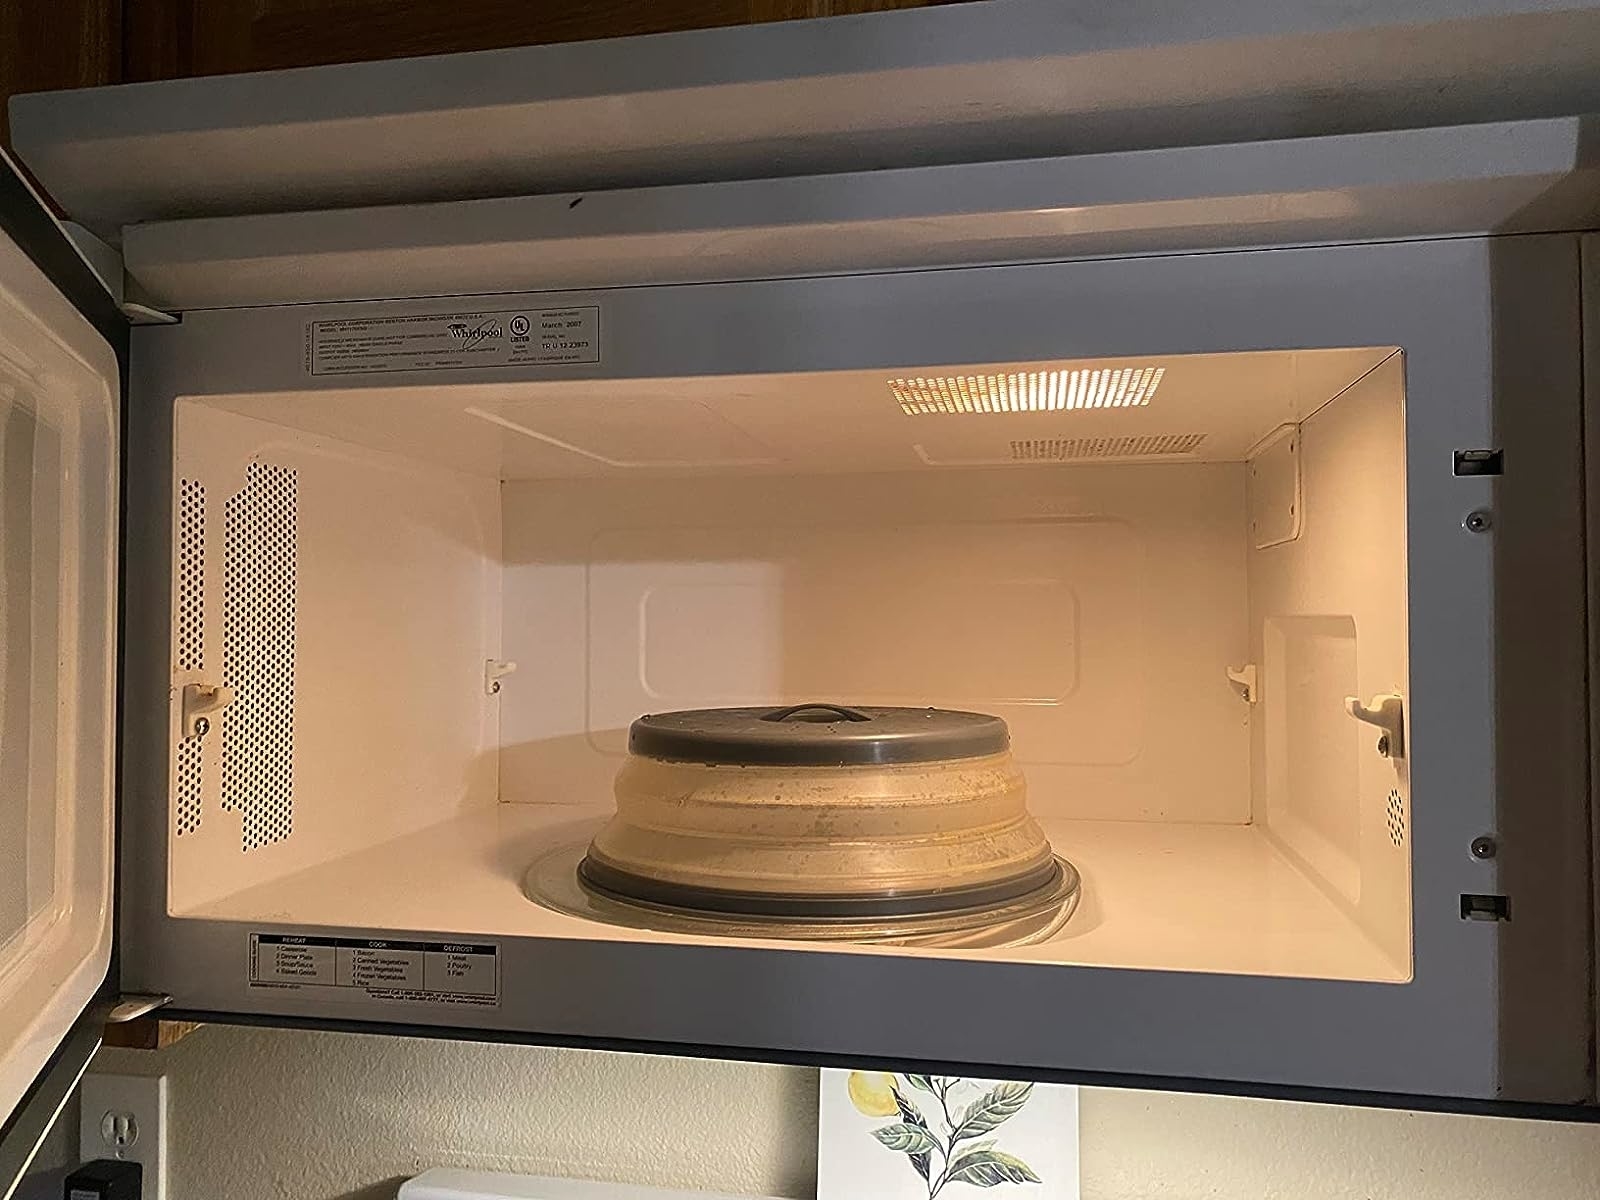 Reviewer image of the gray cover inside their microwave